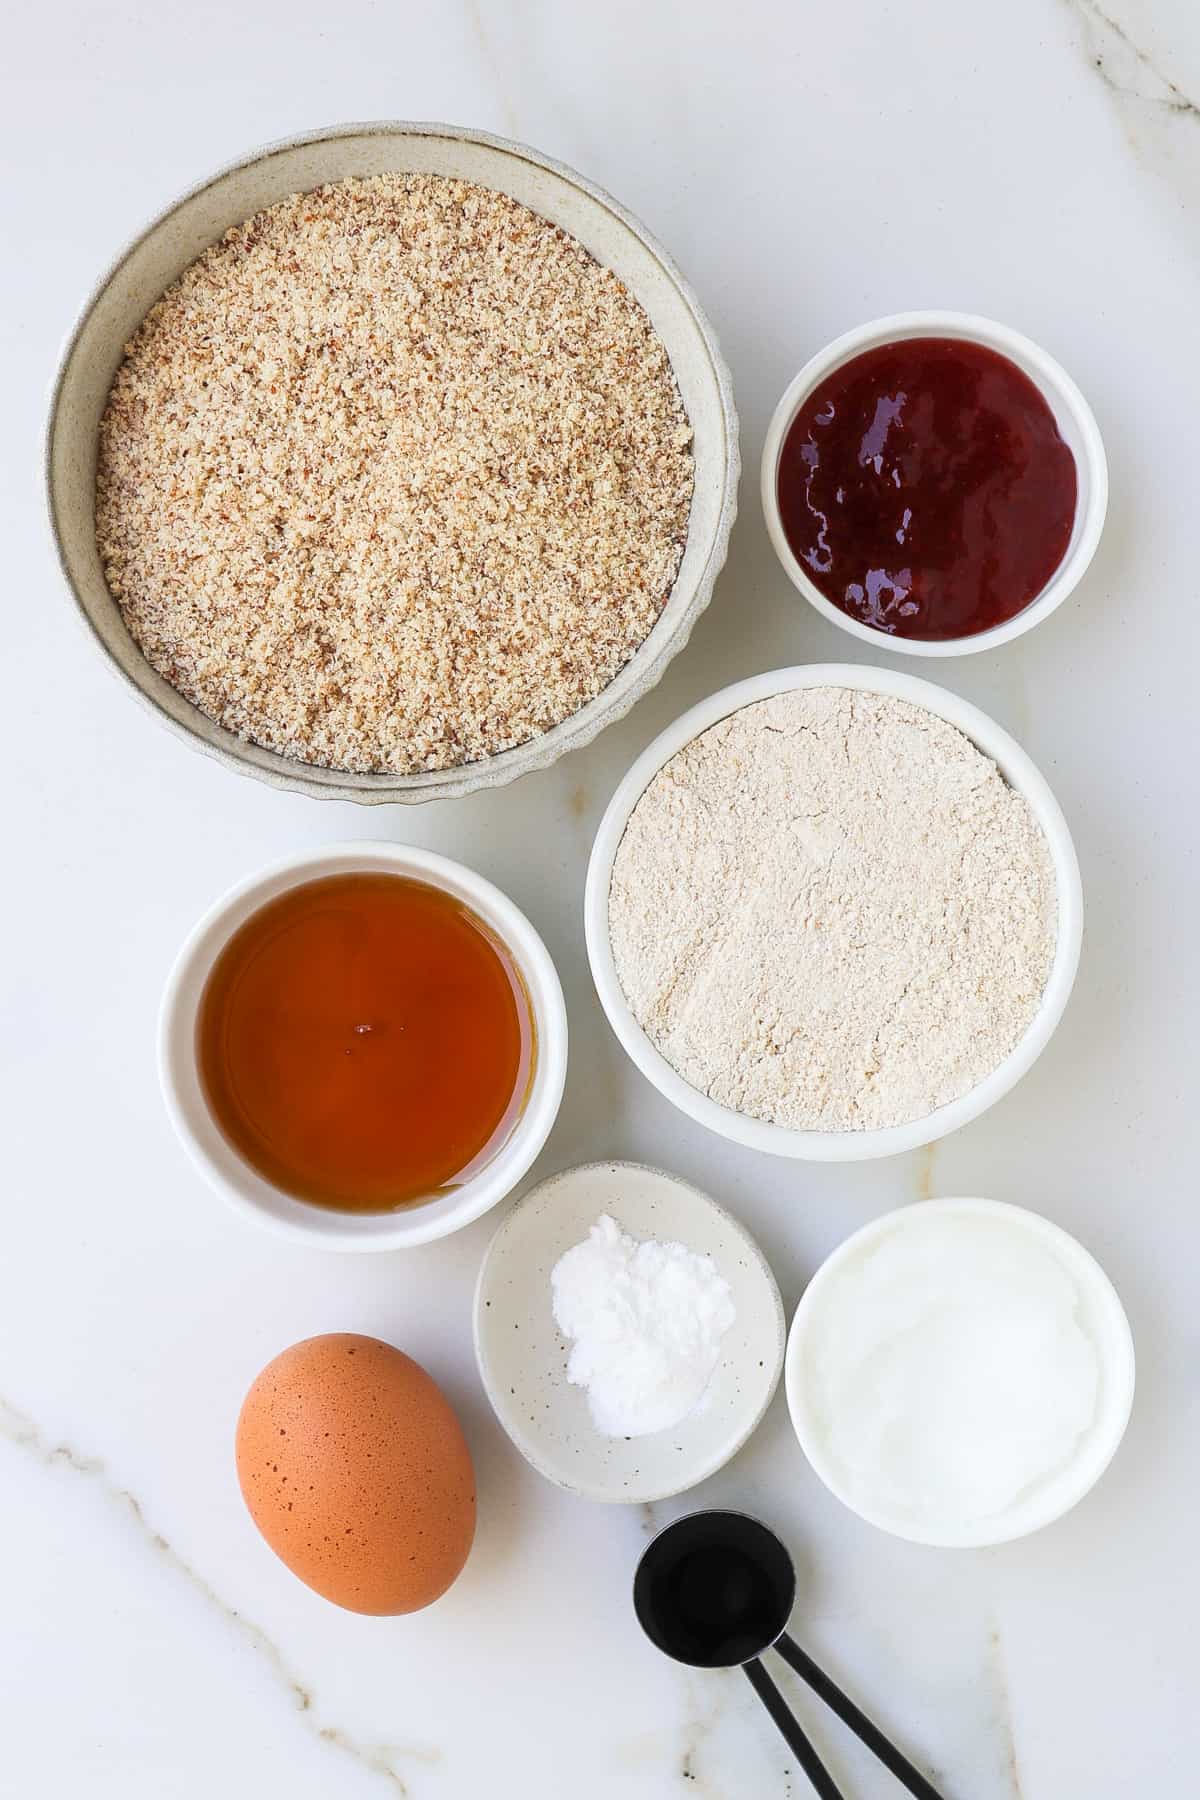 Ingredients shown to make the thumbprint cookies.